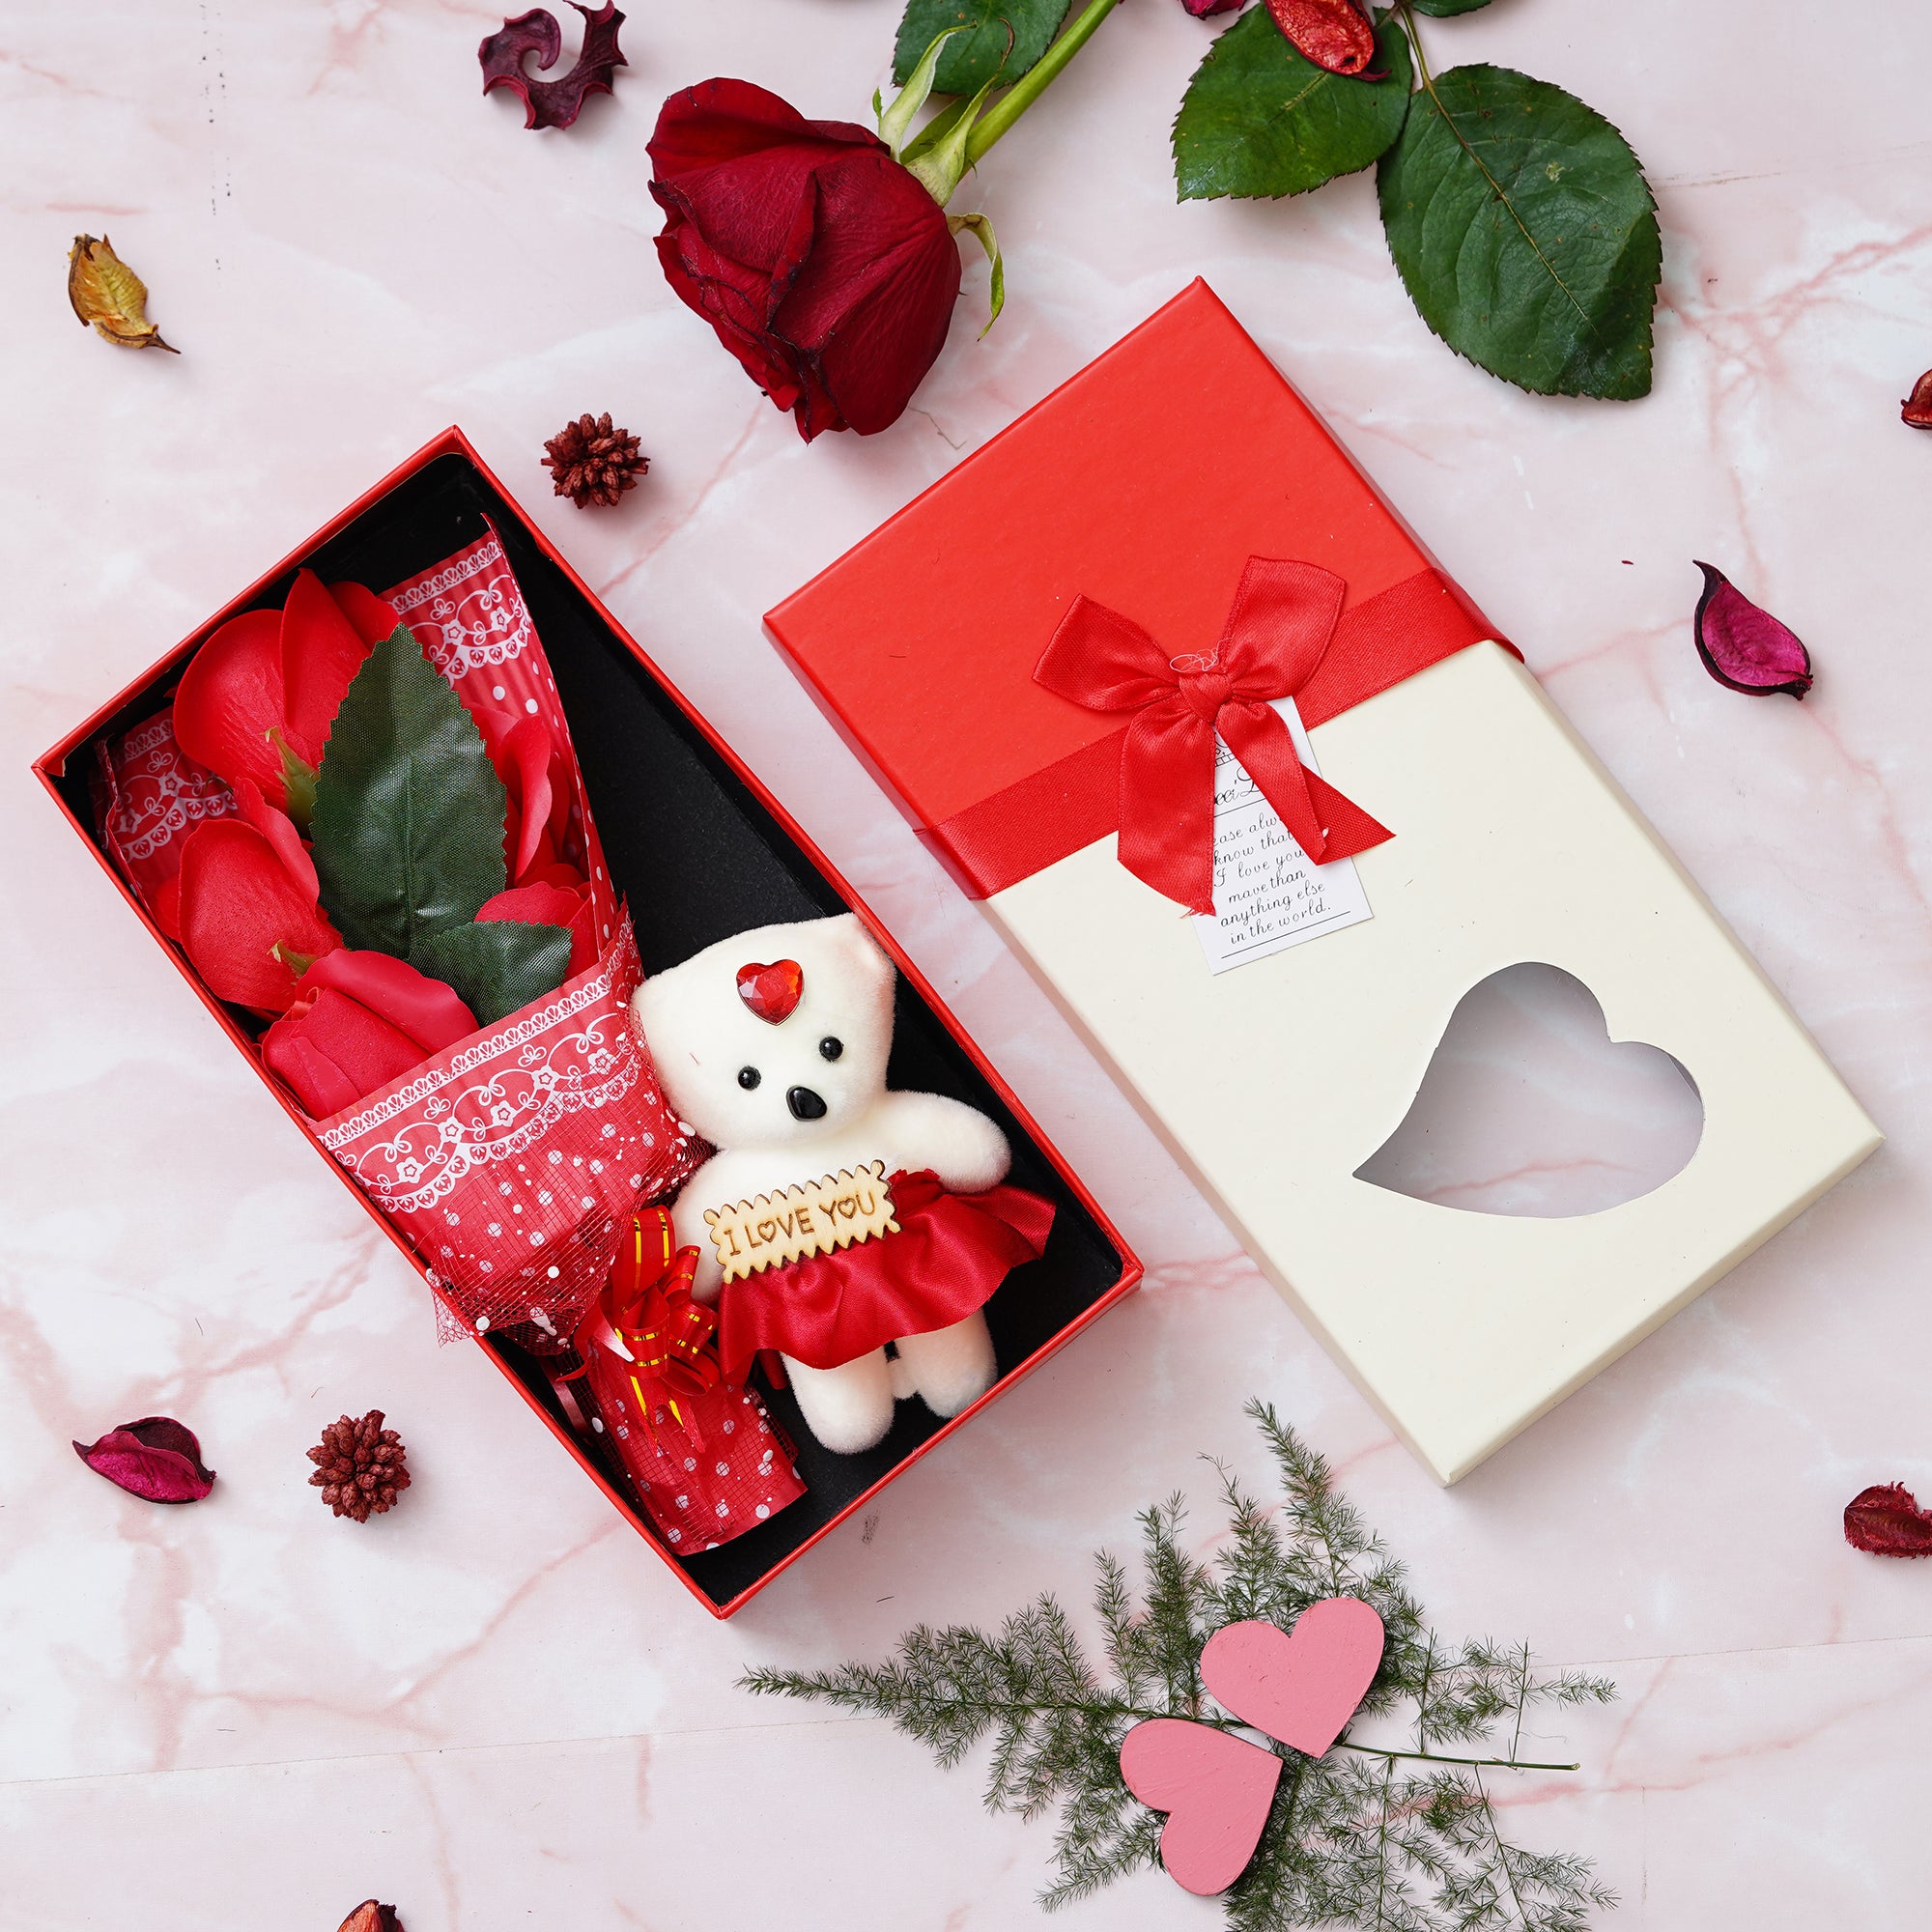 Red Roses Bouqet and White & Red Teddy Bear Valentine's Square Shaped Gift Box